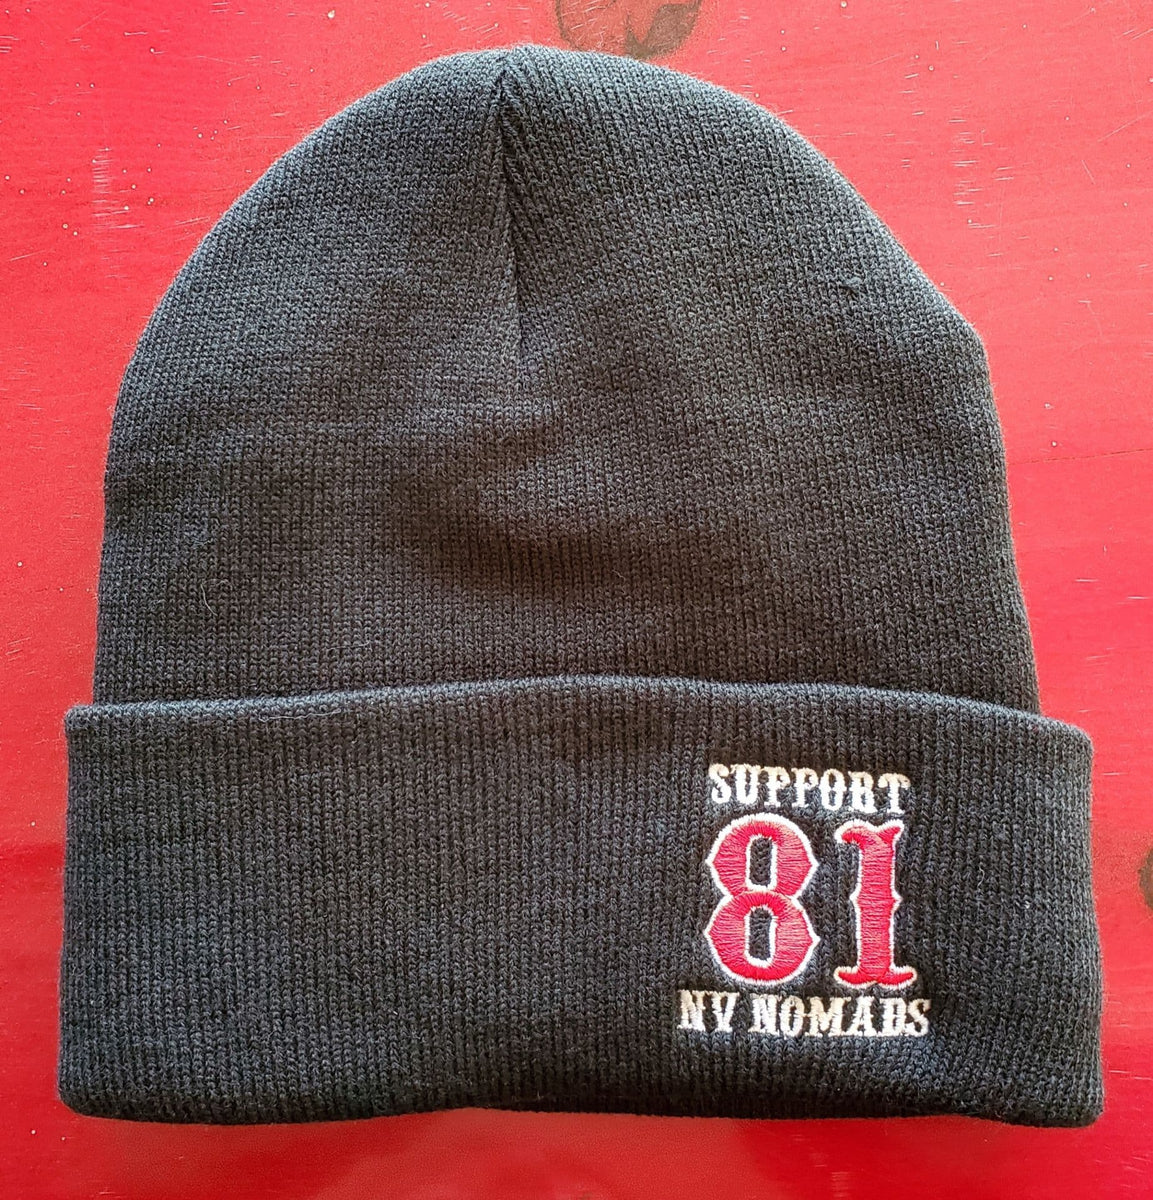 Beanie - 81 Support with Fleece No Itch Liner - Black w/ Red 81 – Nevada  Nomads Support Gear